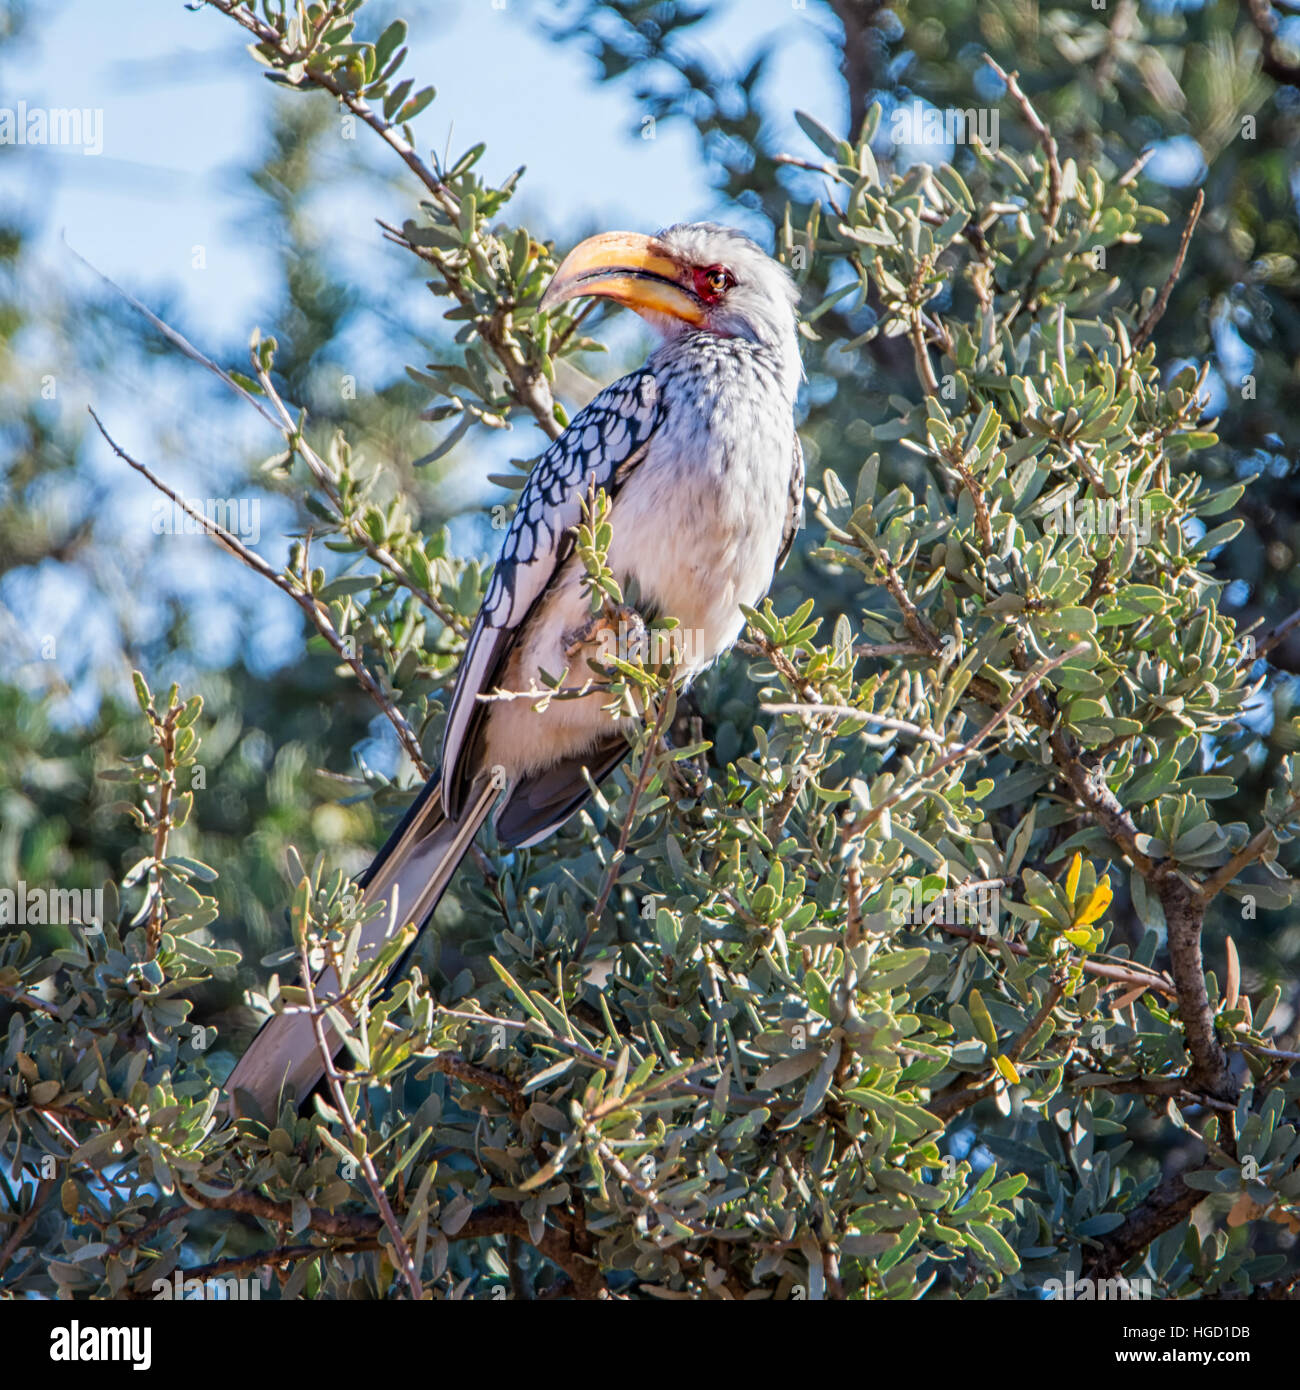 A Yellow-billed Hornbill perched in a tree in Southern Africa Stock Photo